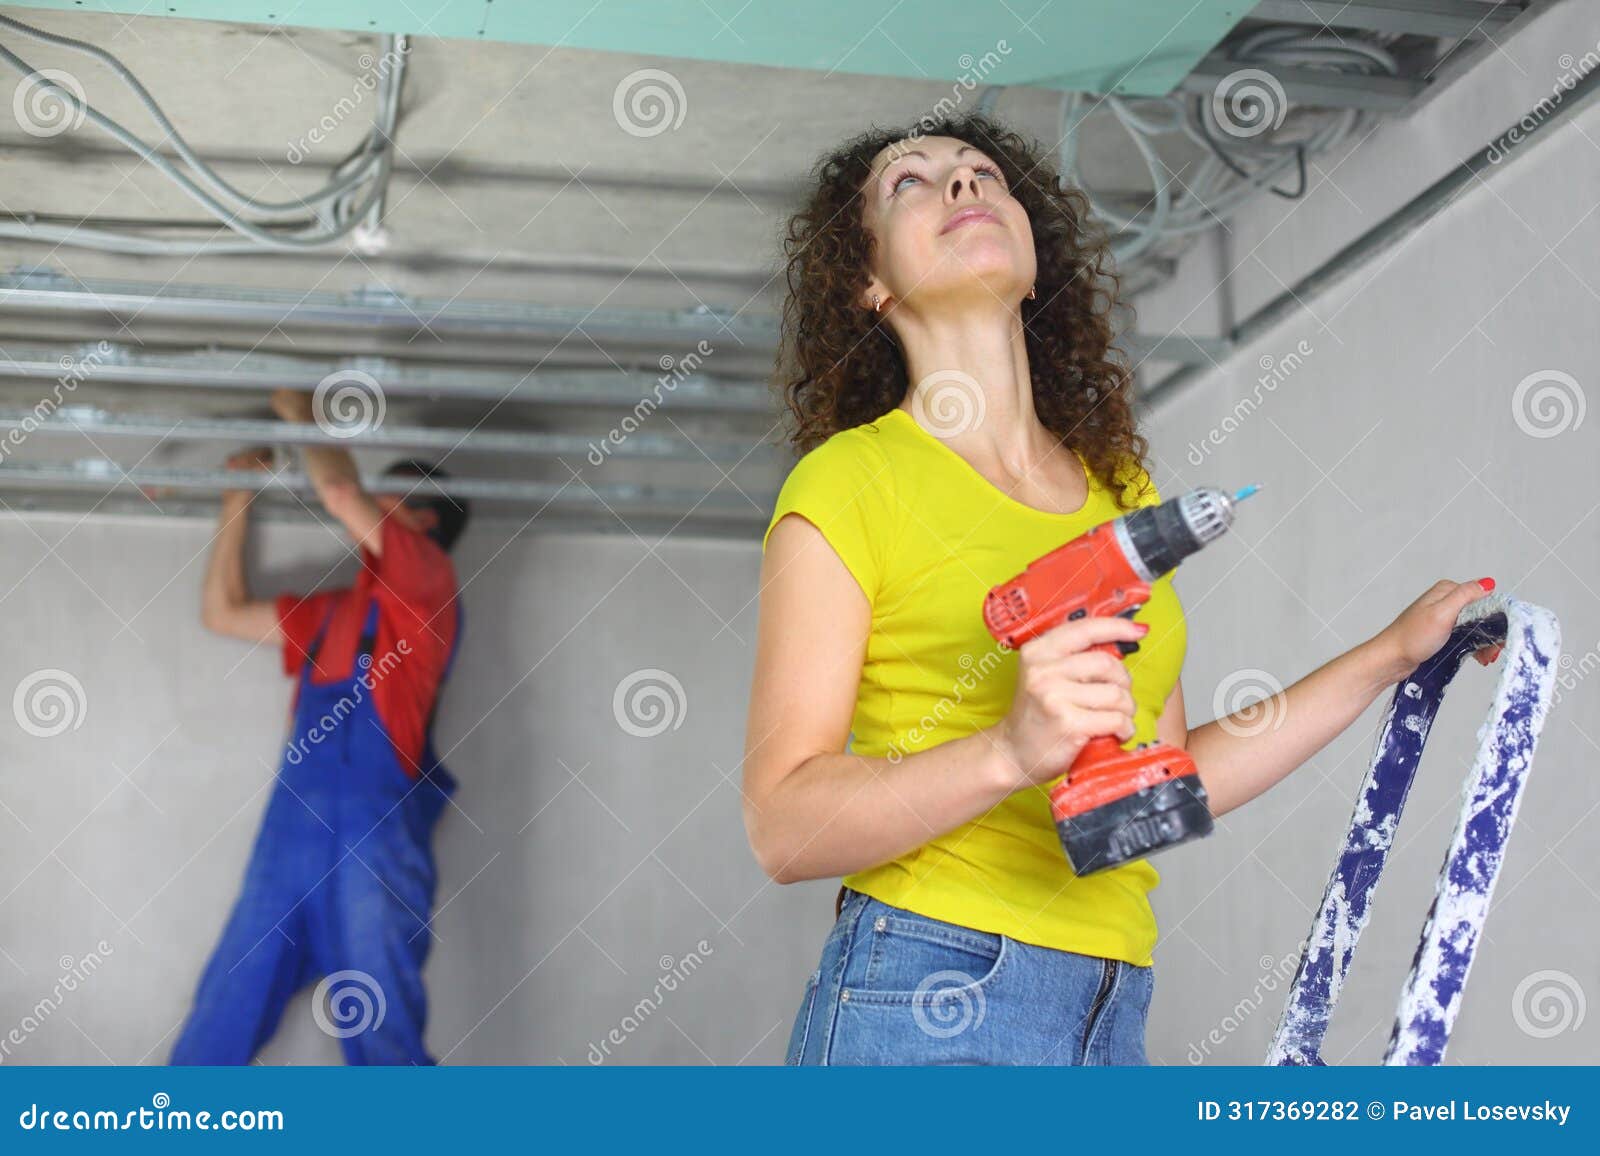 woman with an electric screwdriver and man is